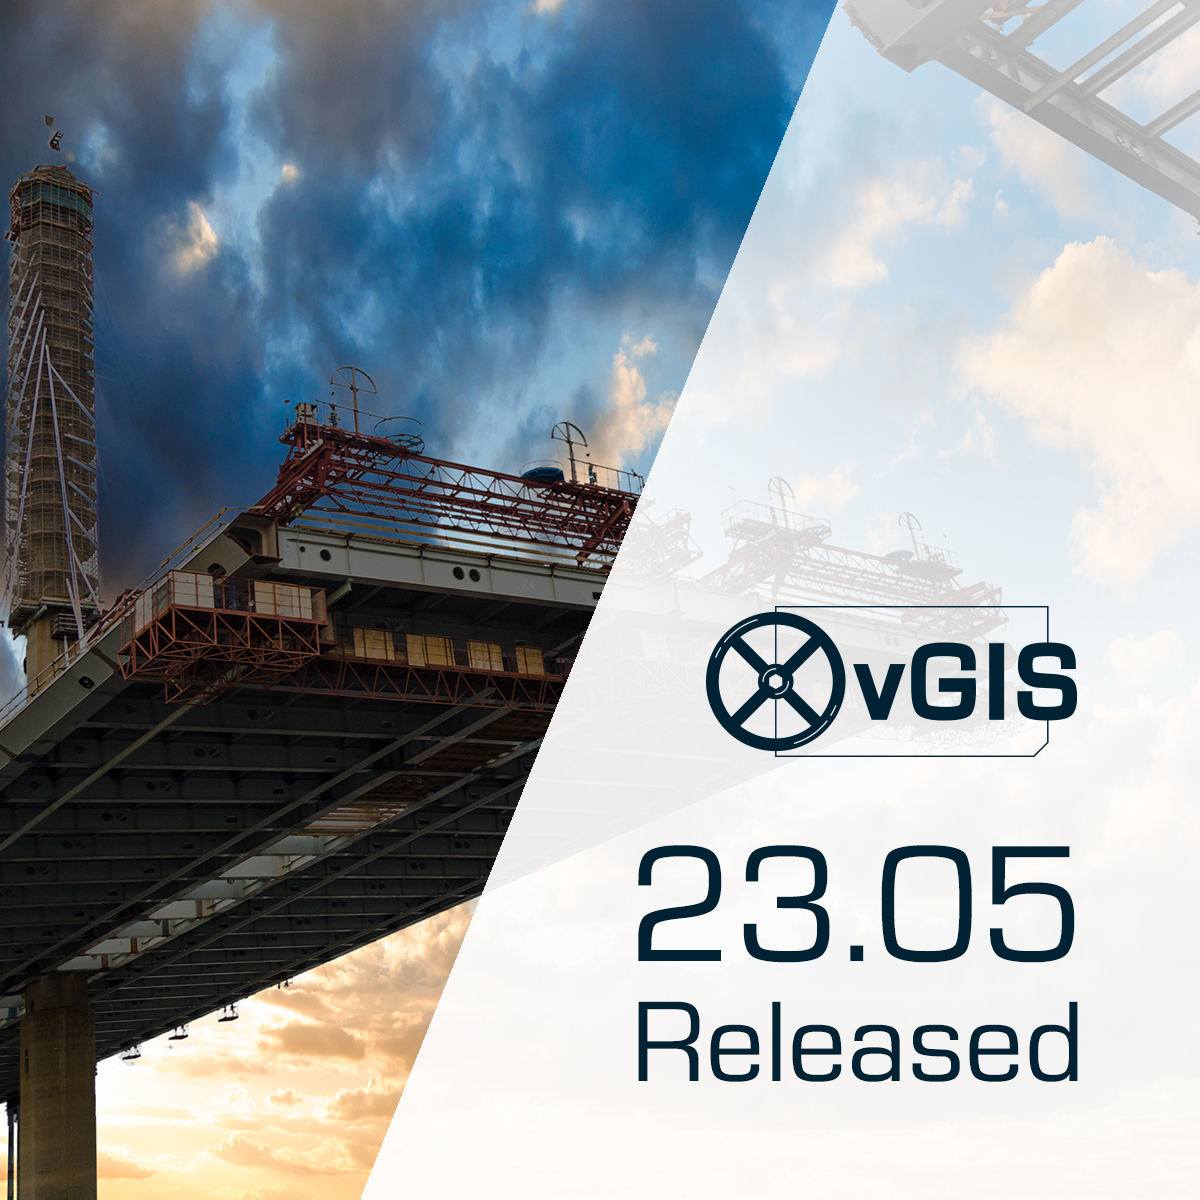 vGIS May '23 release is here. vGIS #AR v2023.05 is available for download (Android, iOS and Windows). We added a new scanning component, few new features to the #mobile app, the portal and plugins. Check the release notes in the portal or email us for details.